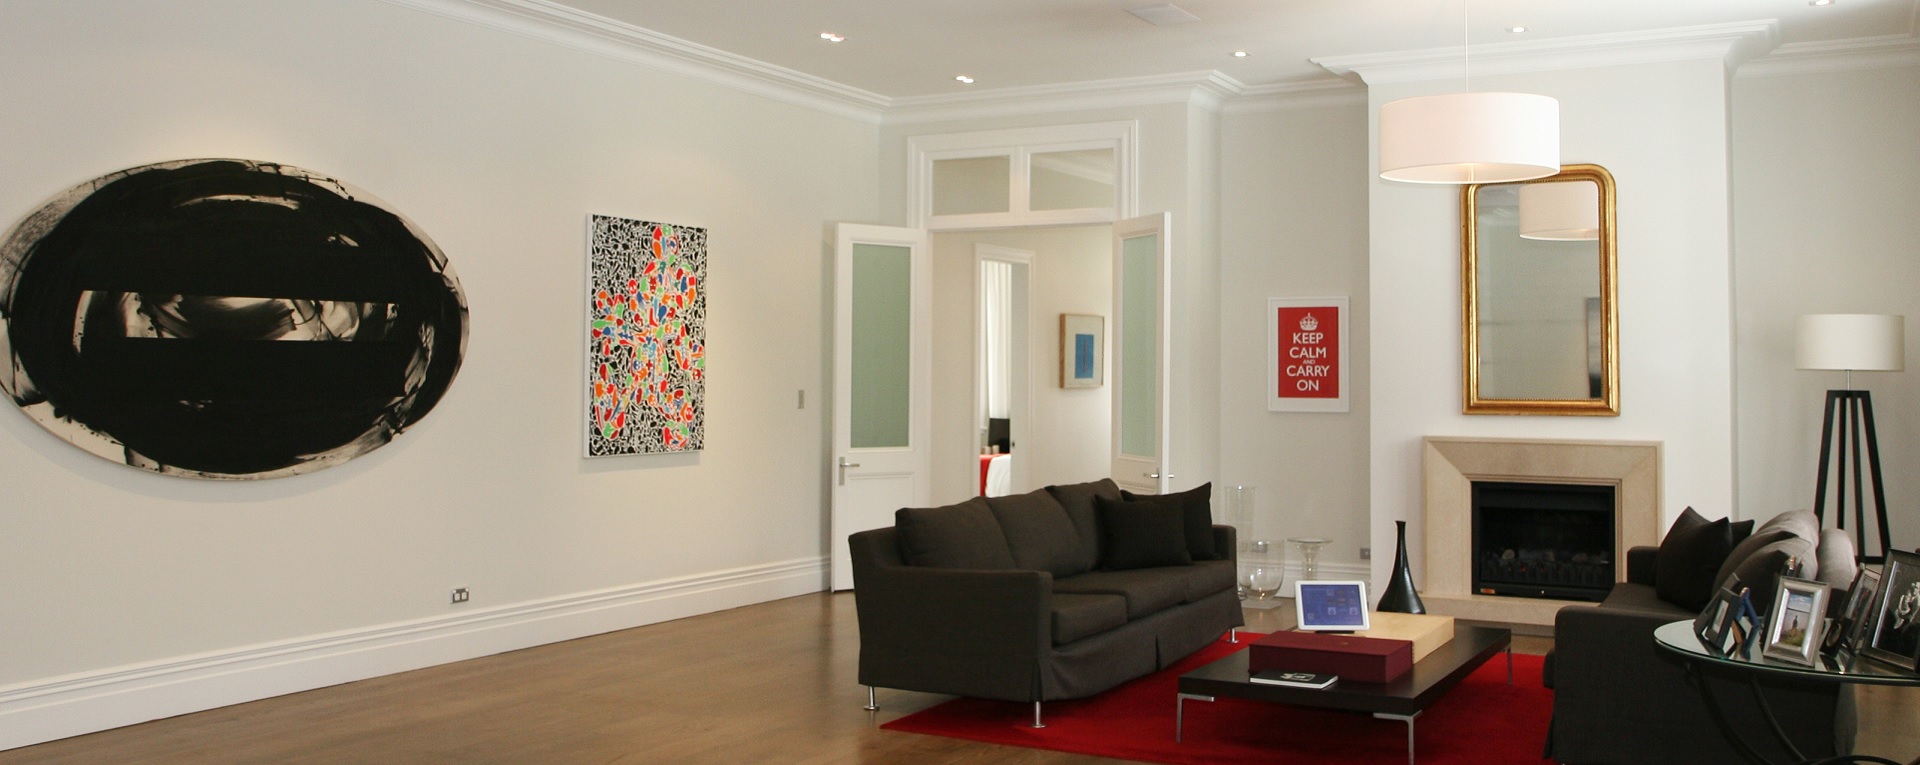 Modern lounge with touchscreen control of home automation, in-ceiling speakers and discrete keypads for lighting control